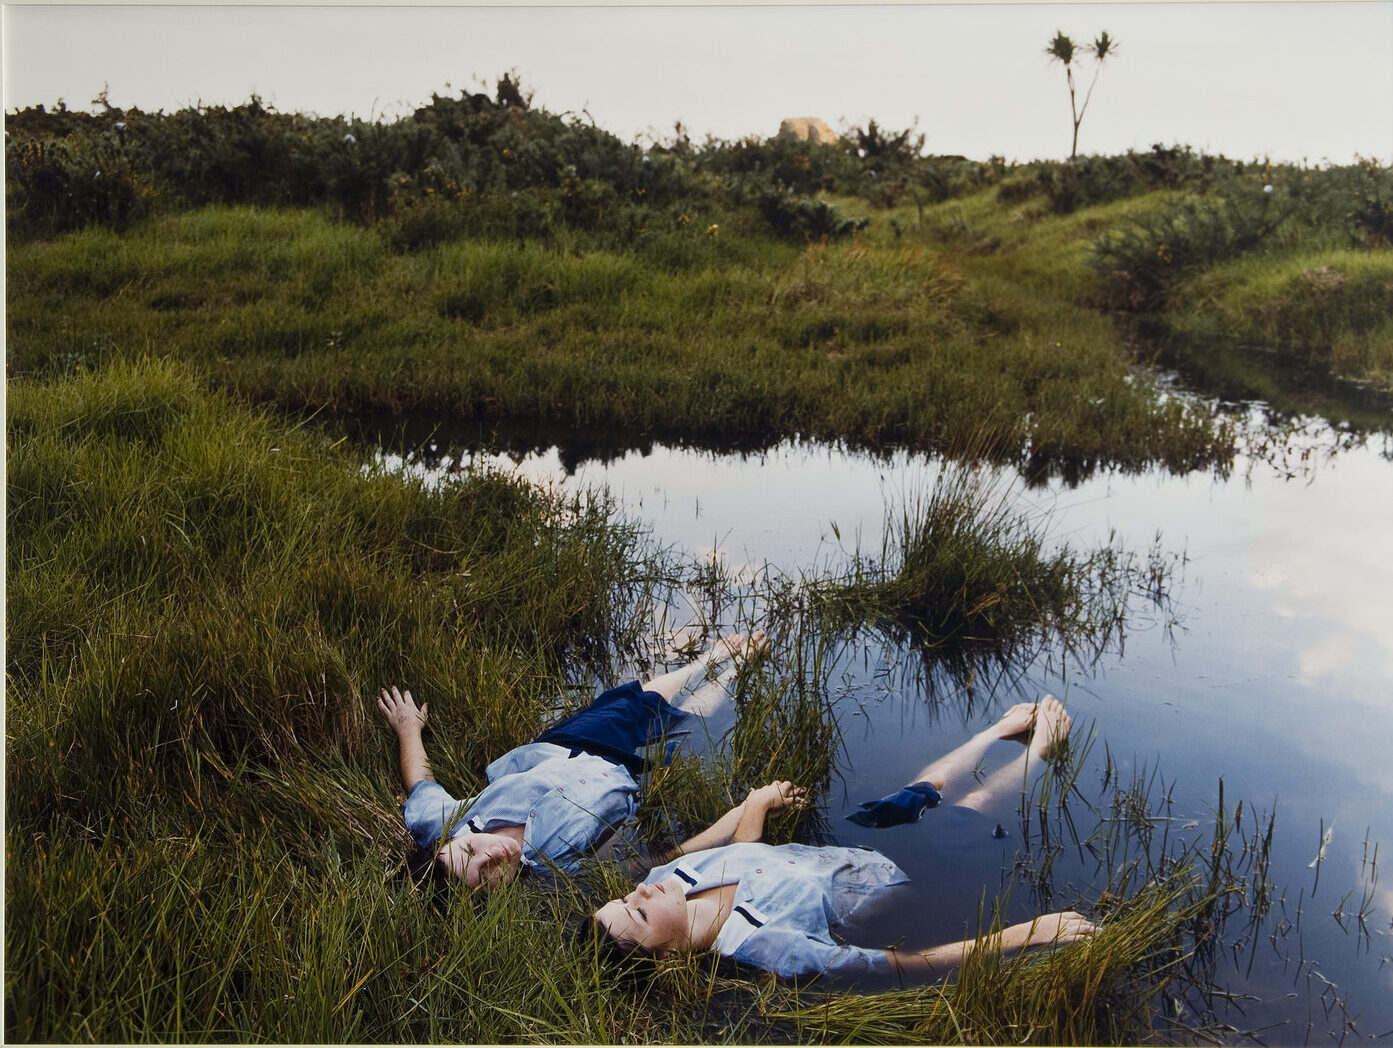 Two adolescent girls with light skin wearing matching blue uniforms float side-by-side on the edge of a grassy pond while holding hands.